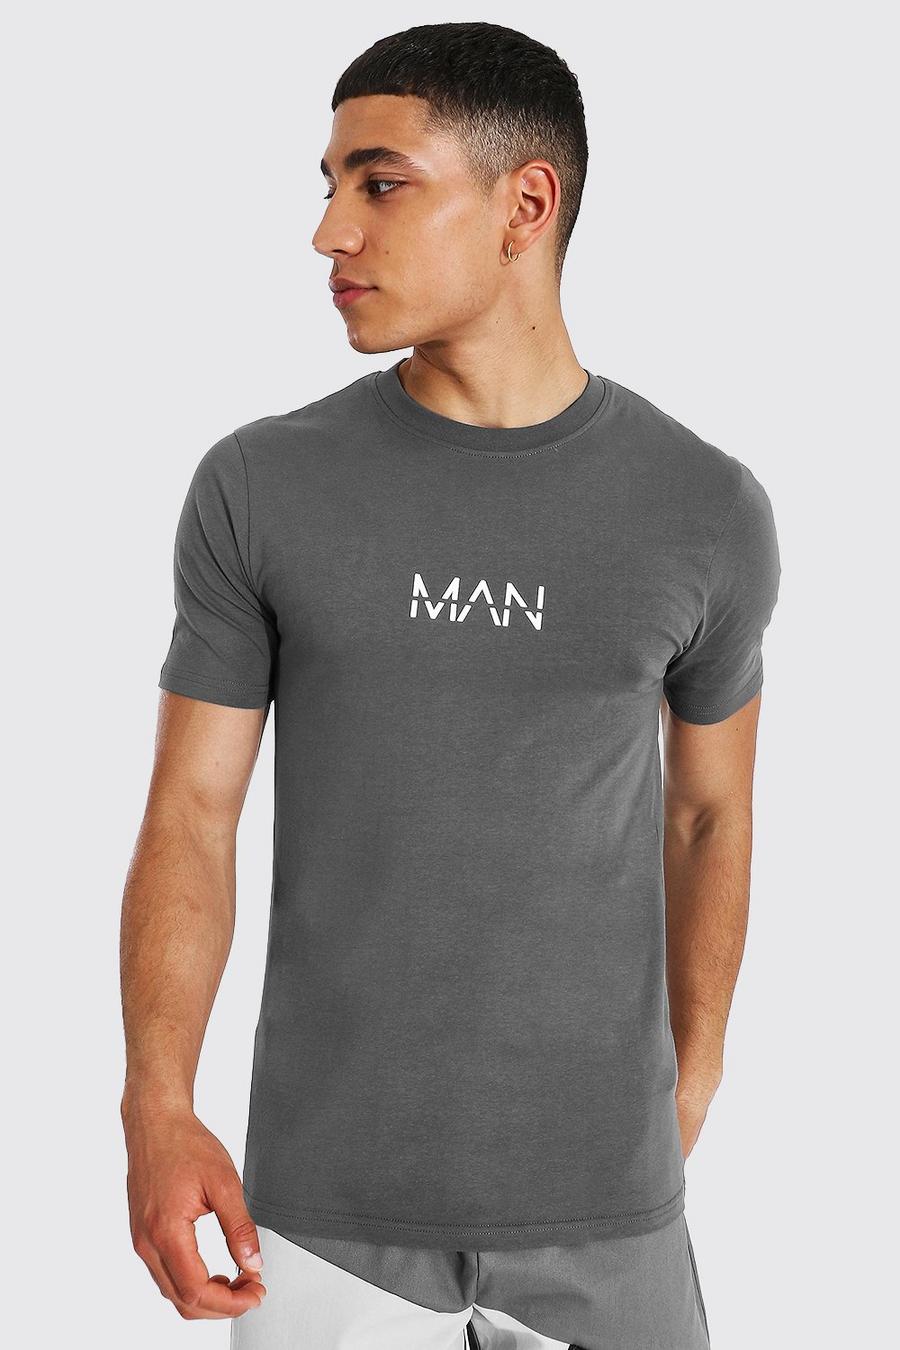 Muscle-Fit Original Man T-Shirt, Charcoal image number 1